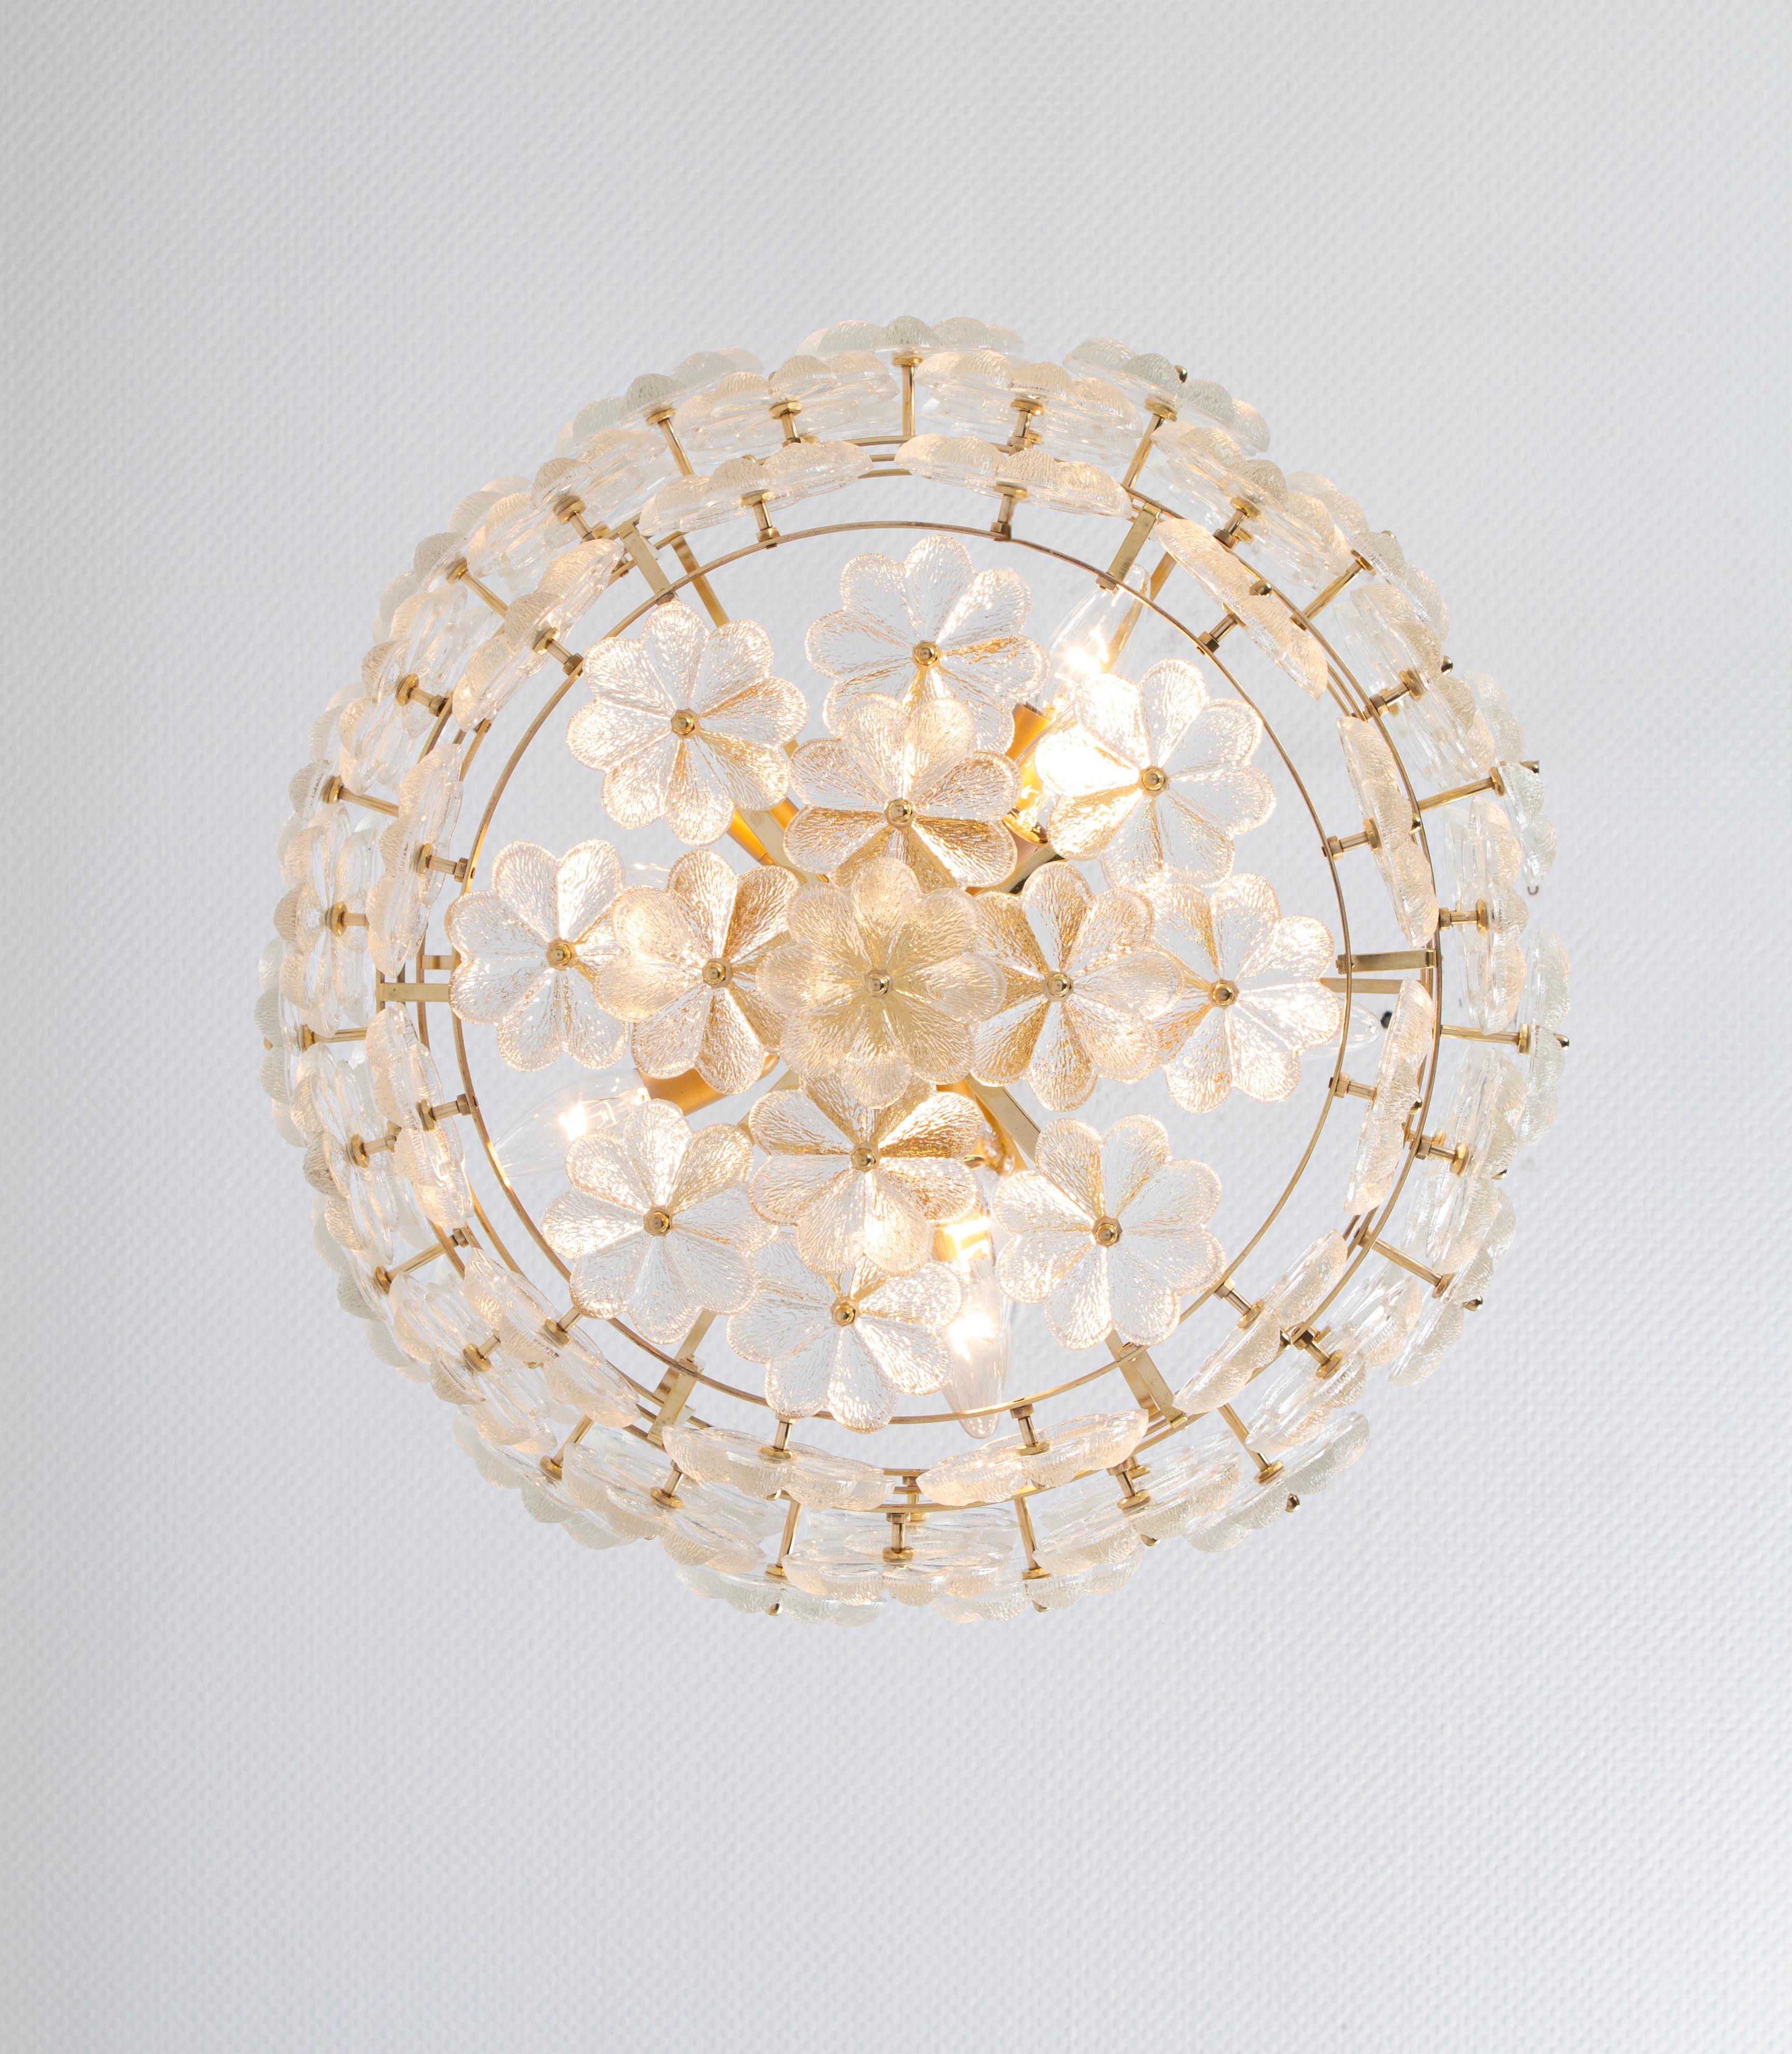 1 of 2 Stunning Murano Glass Chandelier by Ernst Palme, Germany, 1970s For Sale 2